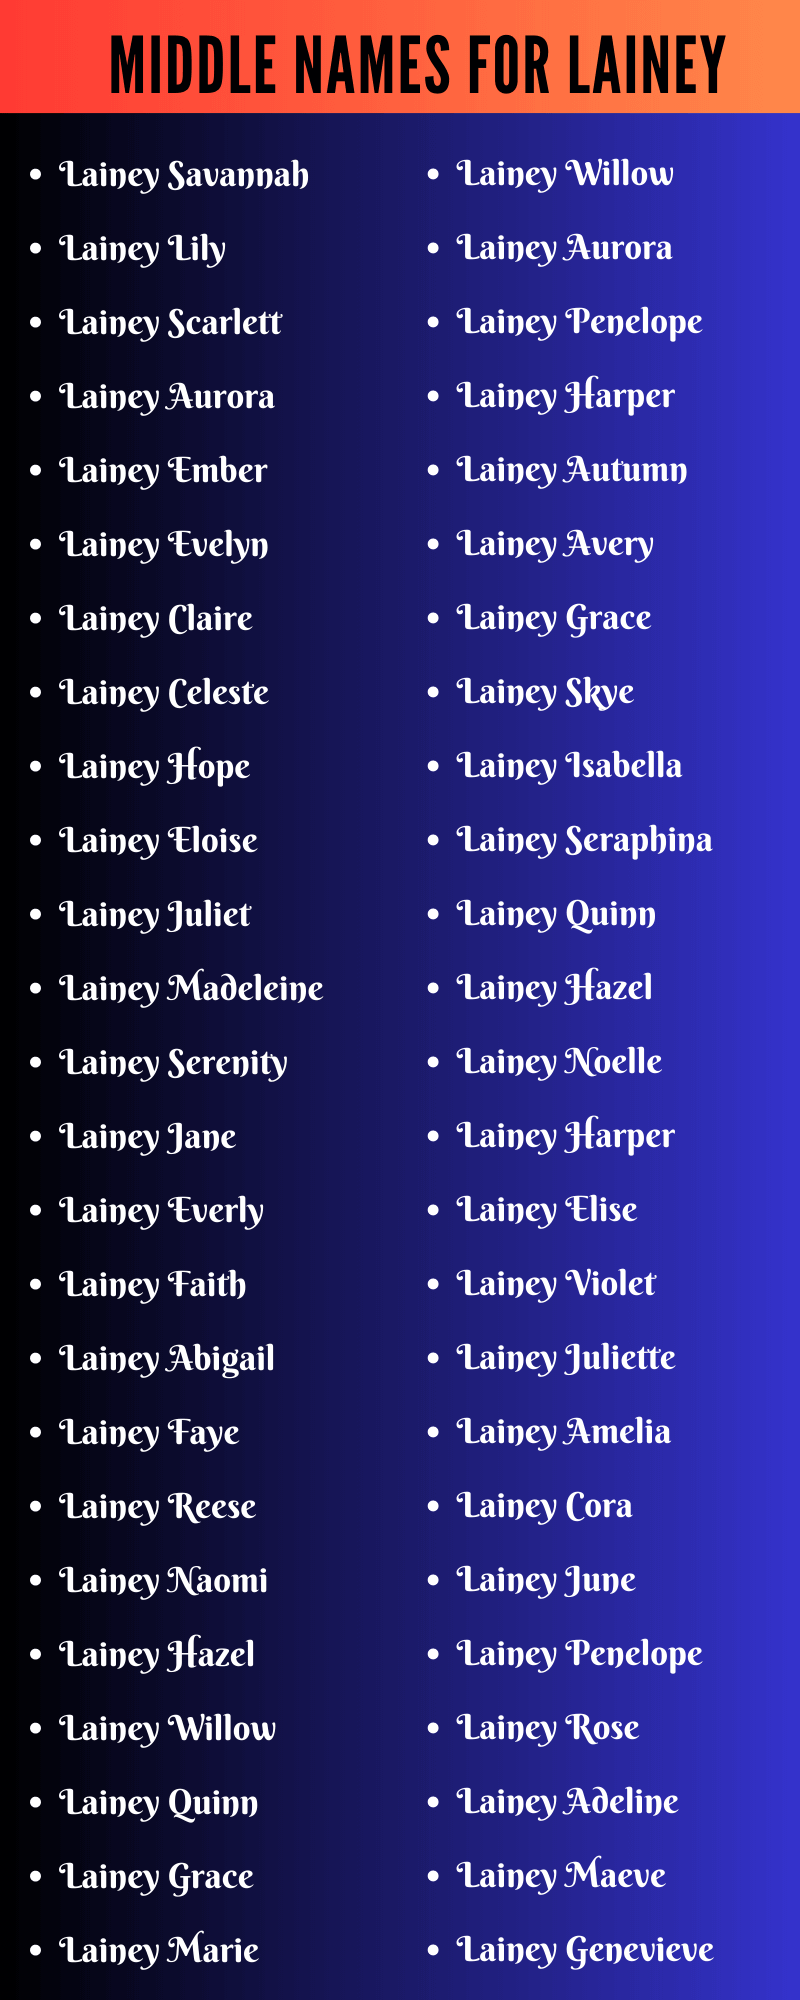 Middle Names For Lainey